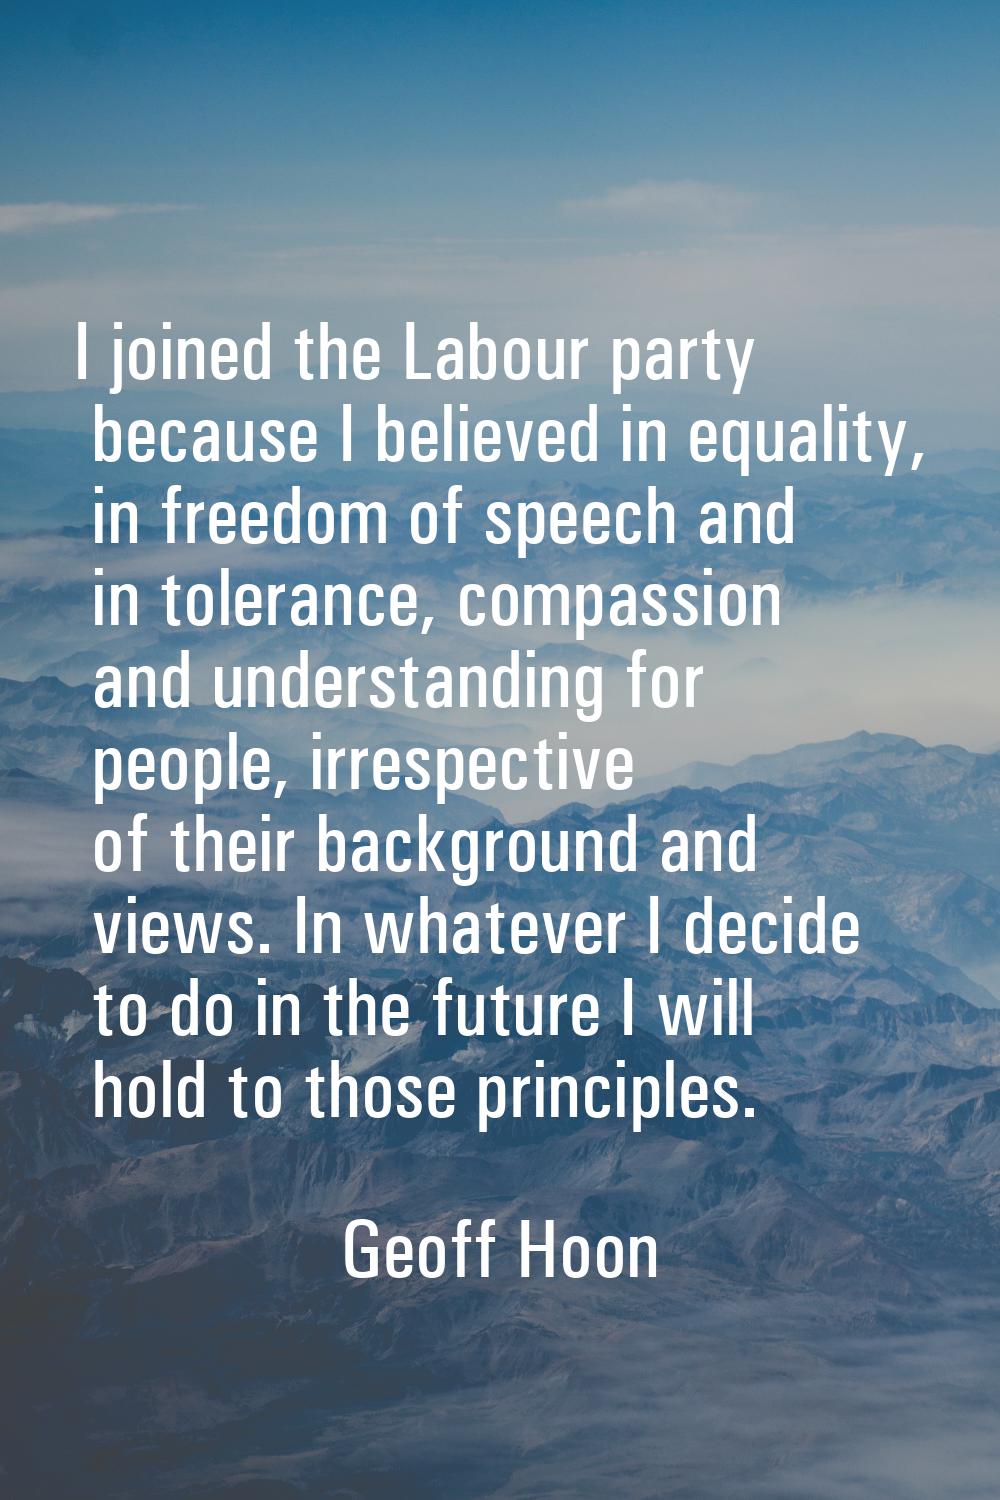 I joined the Labour party because I believed in equality, in freedom of speech and in tolerance, co